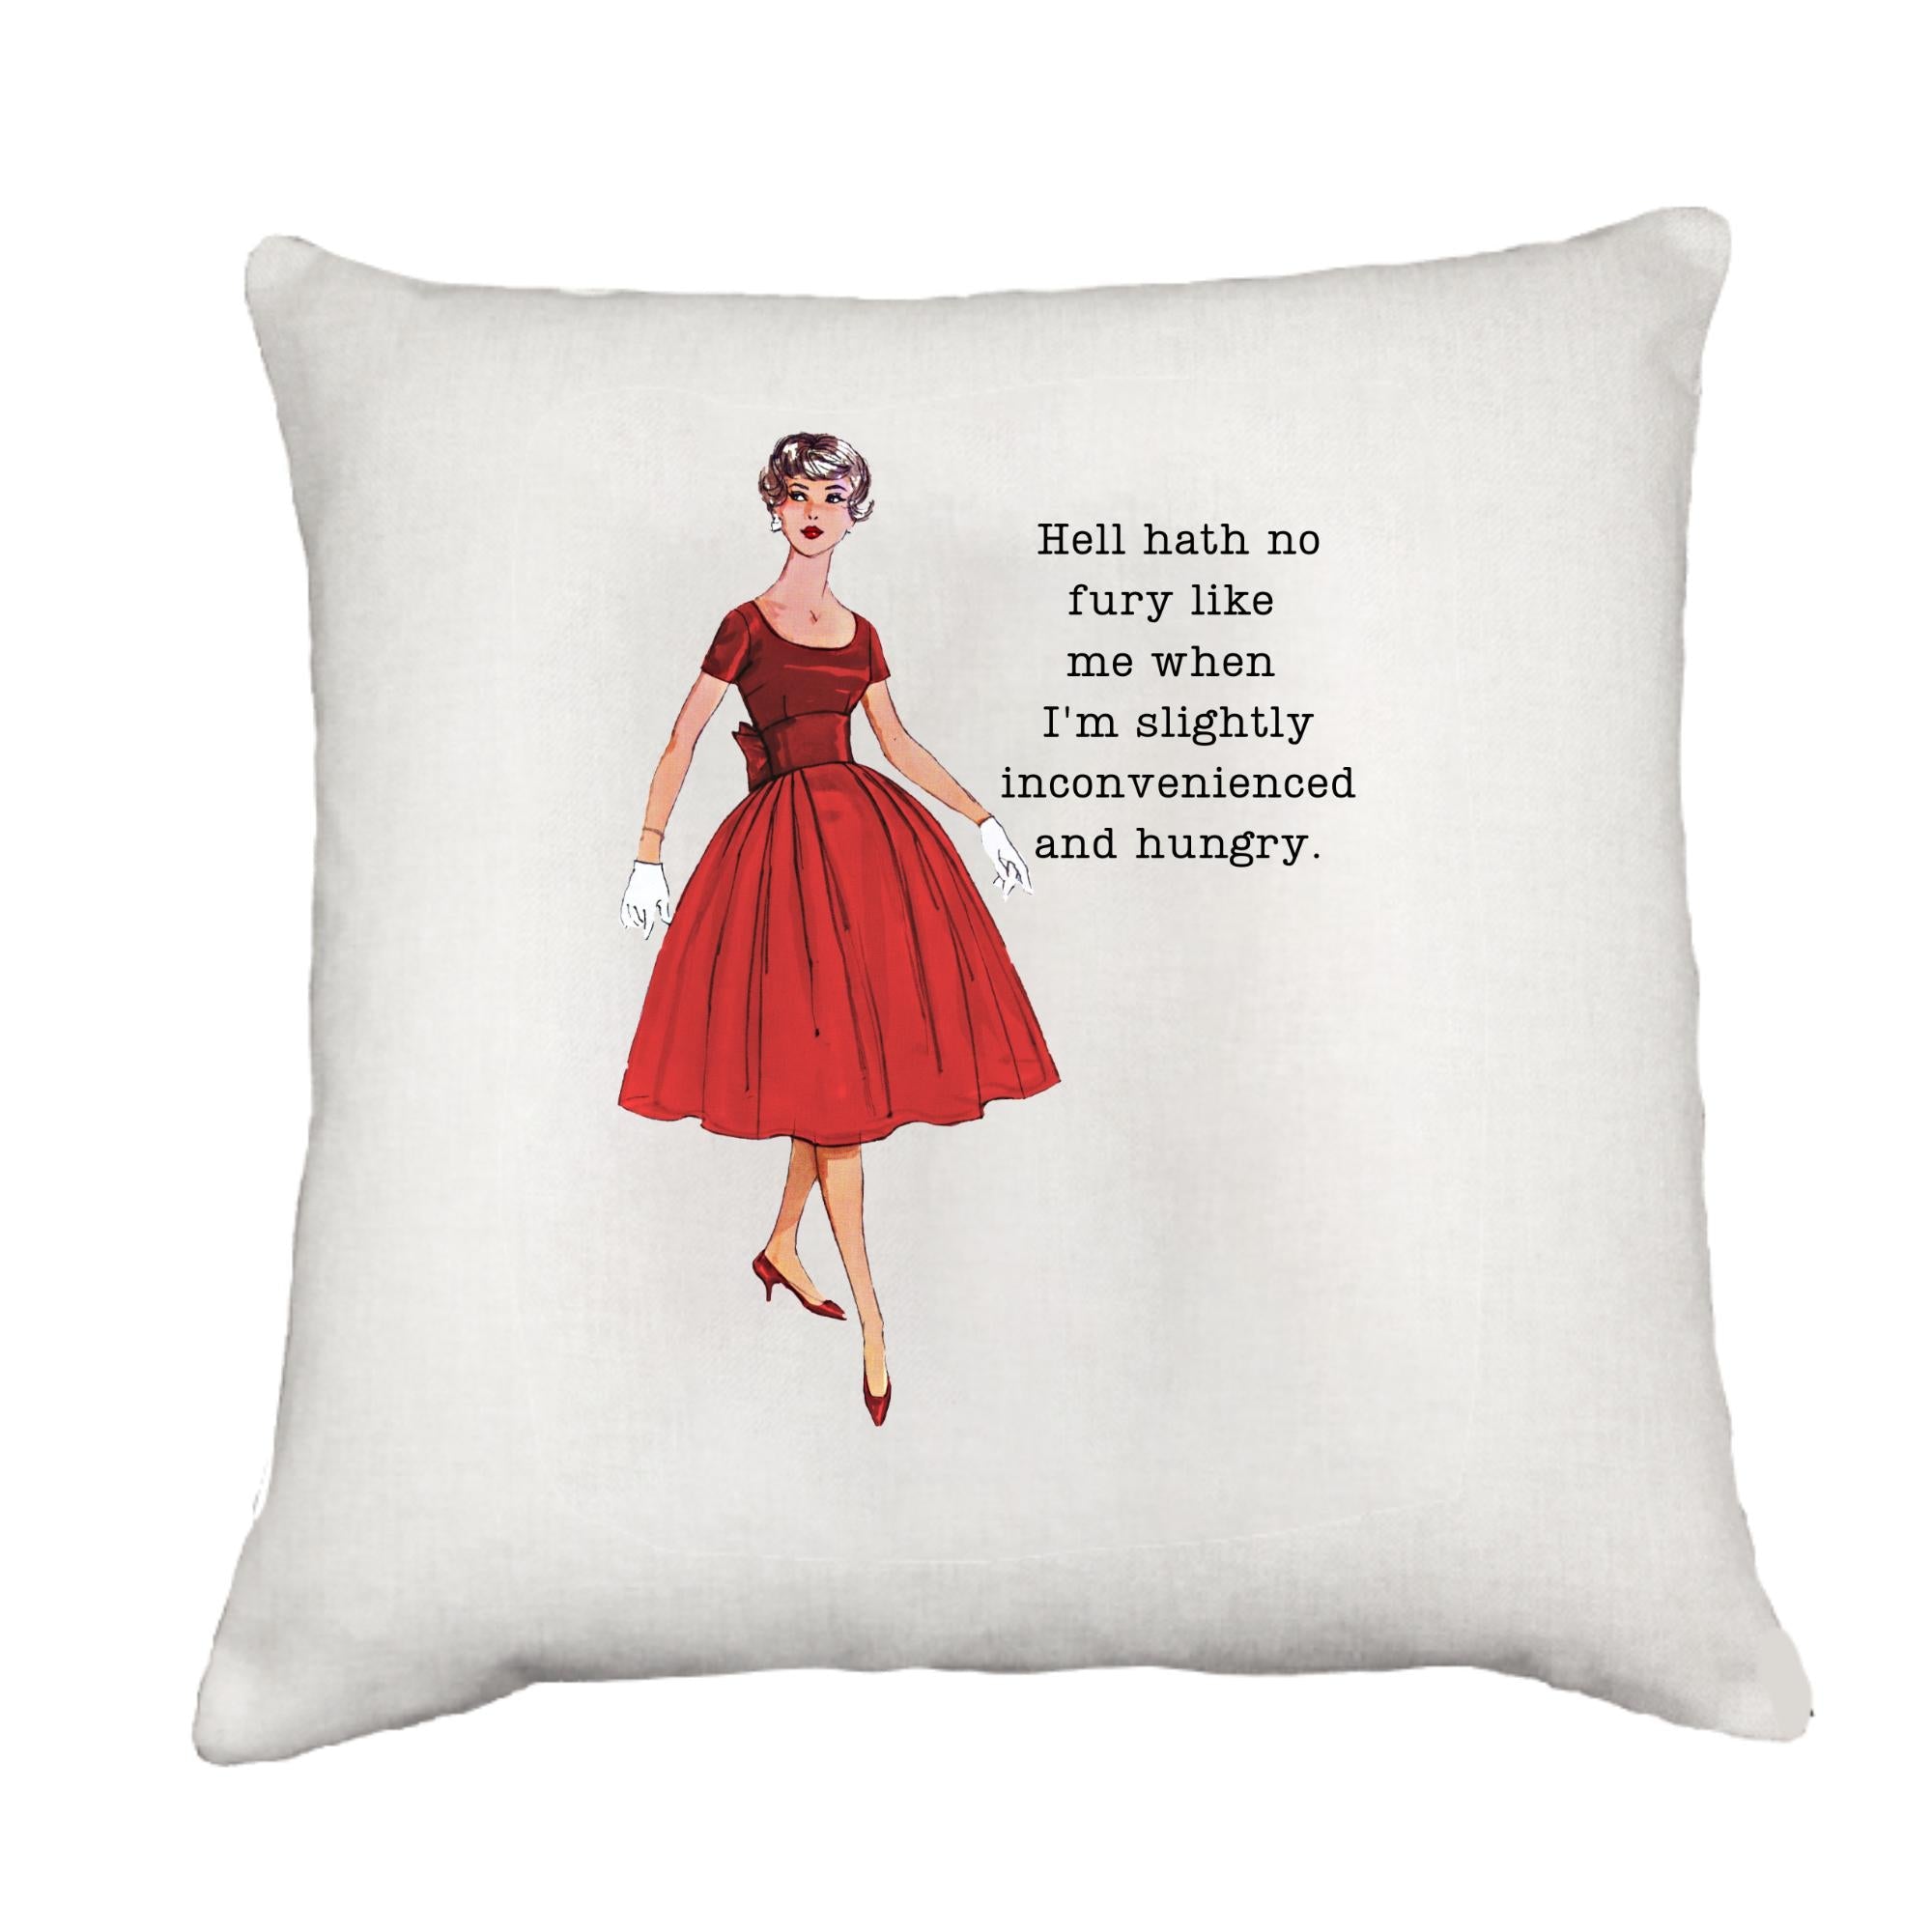 Inconvenienced and Hungry Cottage Pillow Throw/Decorative Pillow - Southern Sisters